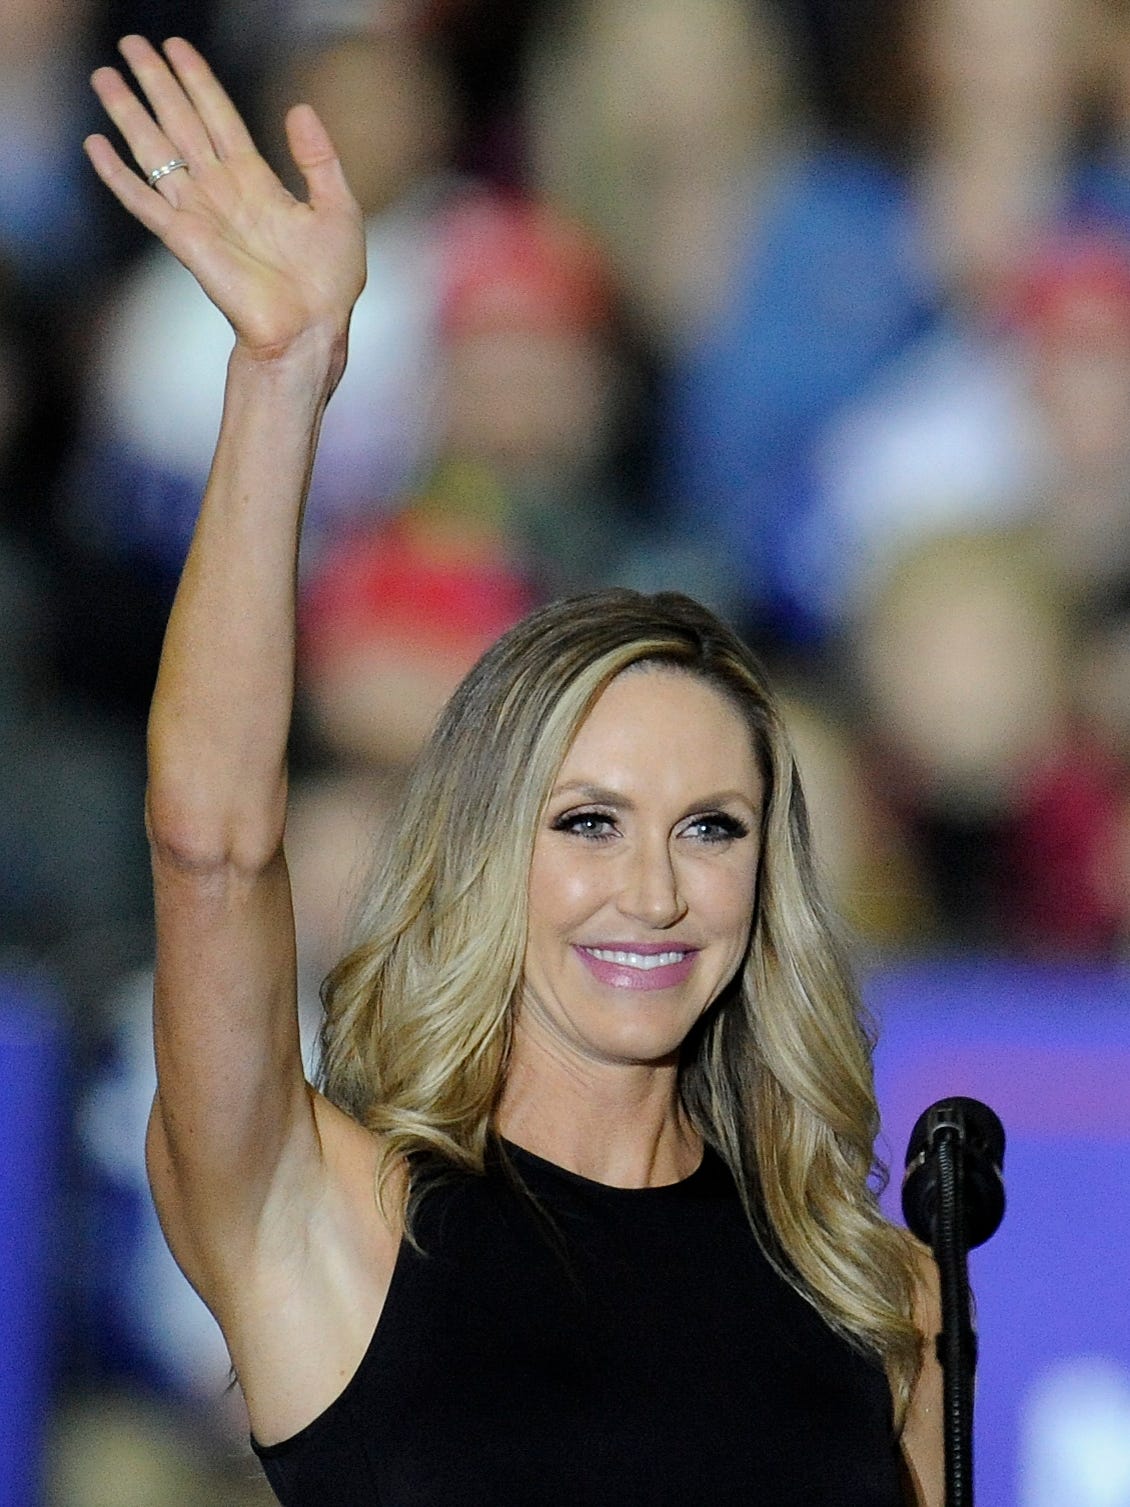 Lara Trump, daughter-in-law to President Trump and wife to his second son, Eric Trump, waves at the crowd after speaking.